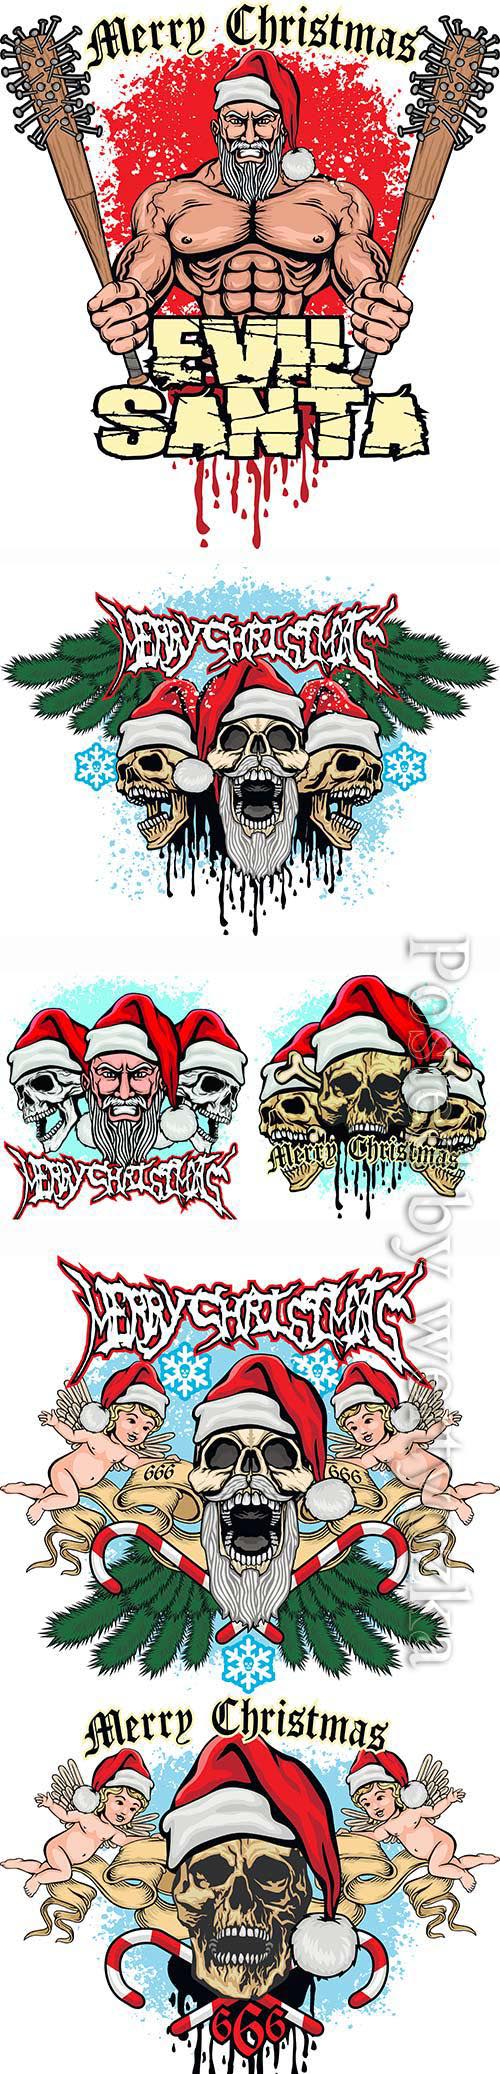 Xmas sign with skull and Santa Claus, grunge vintage design